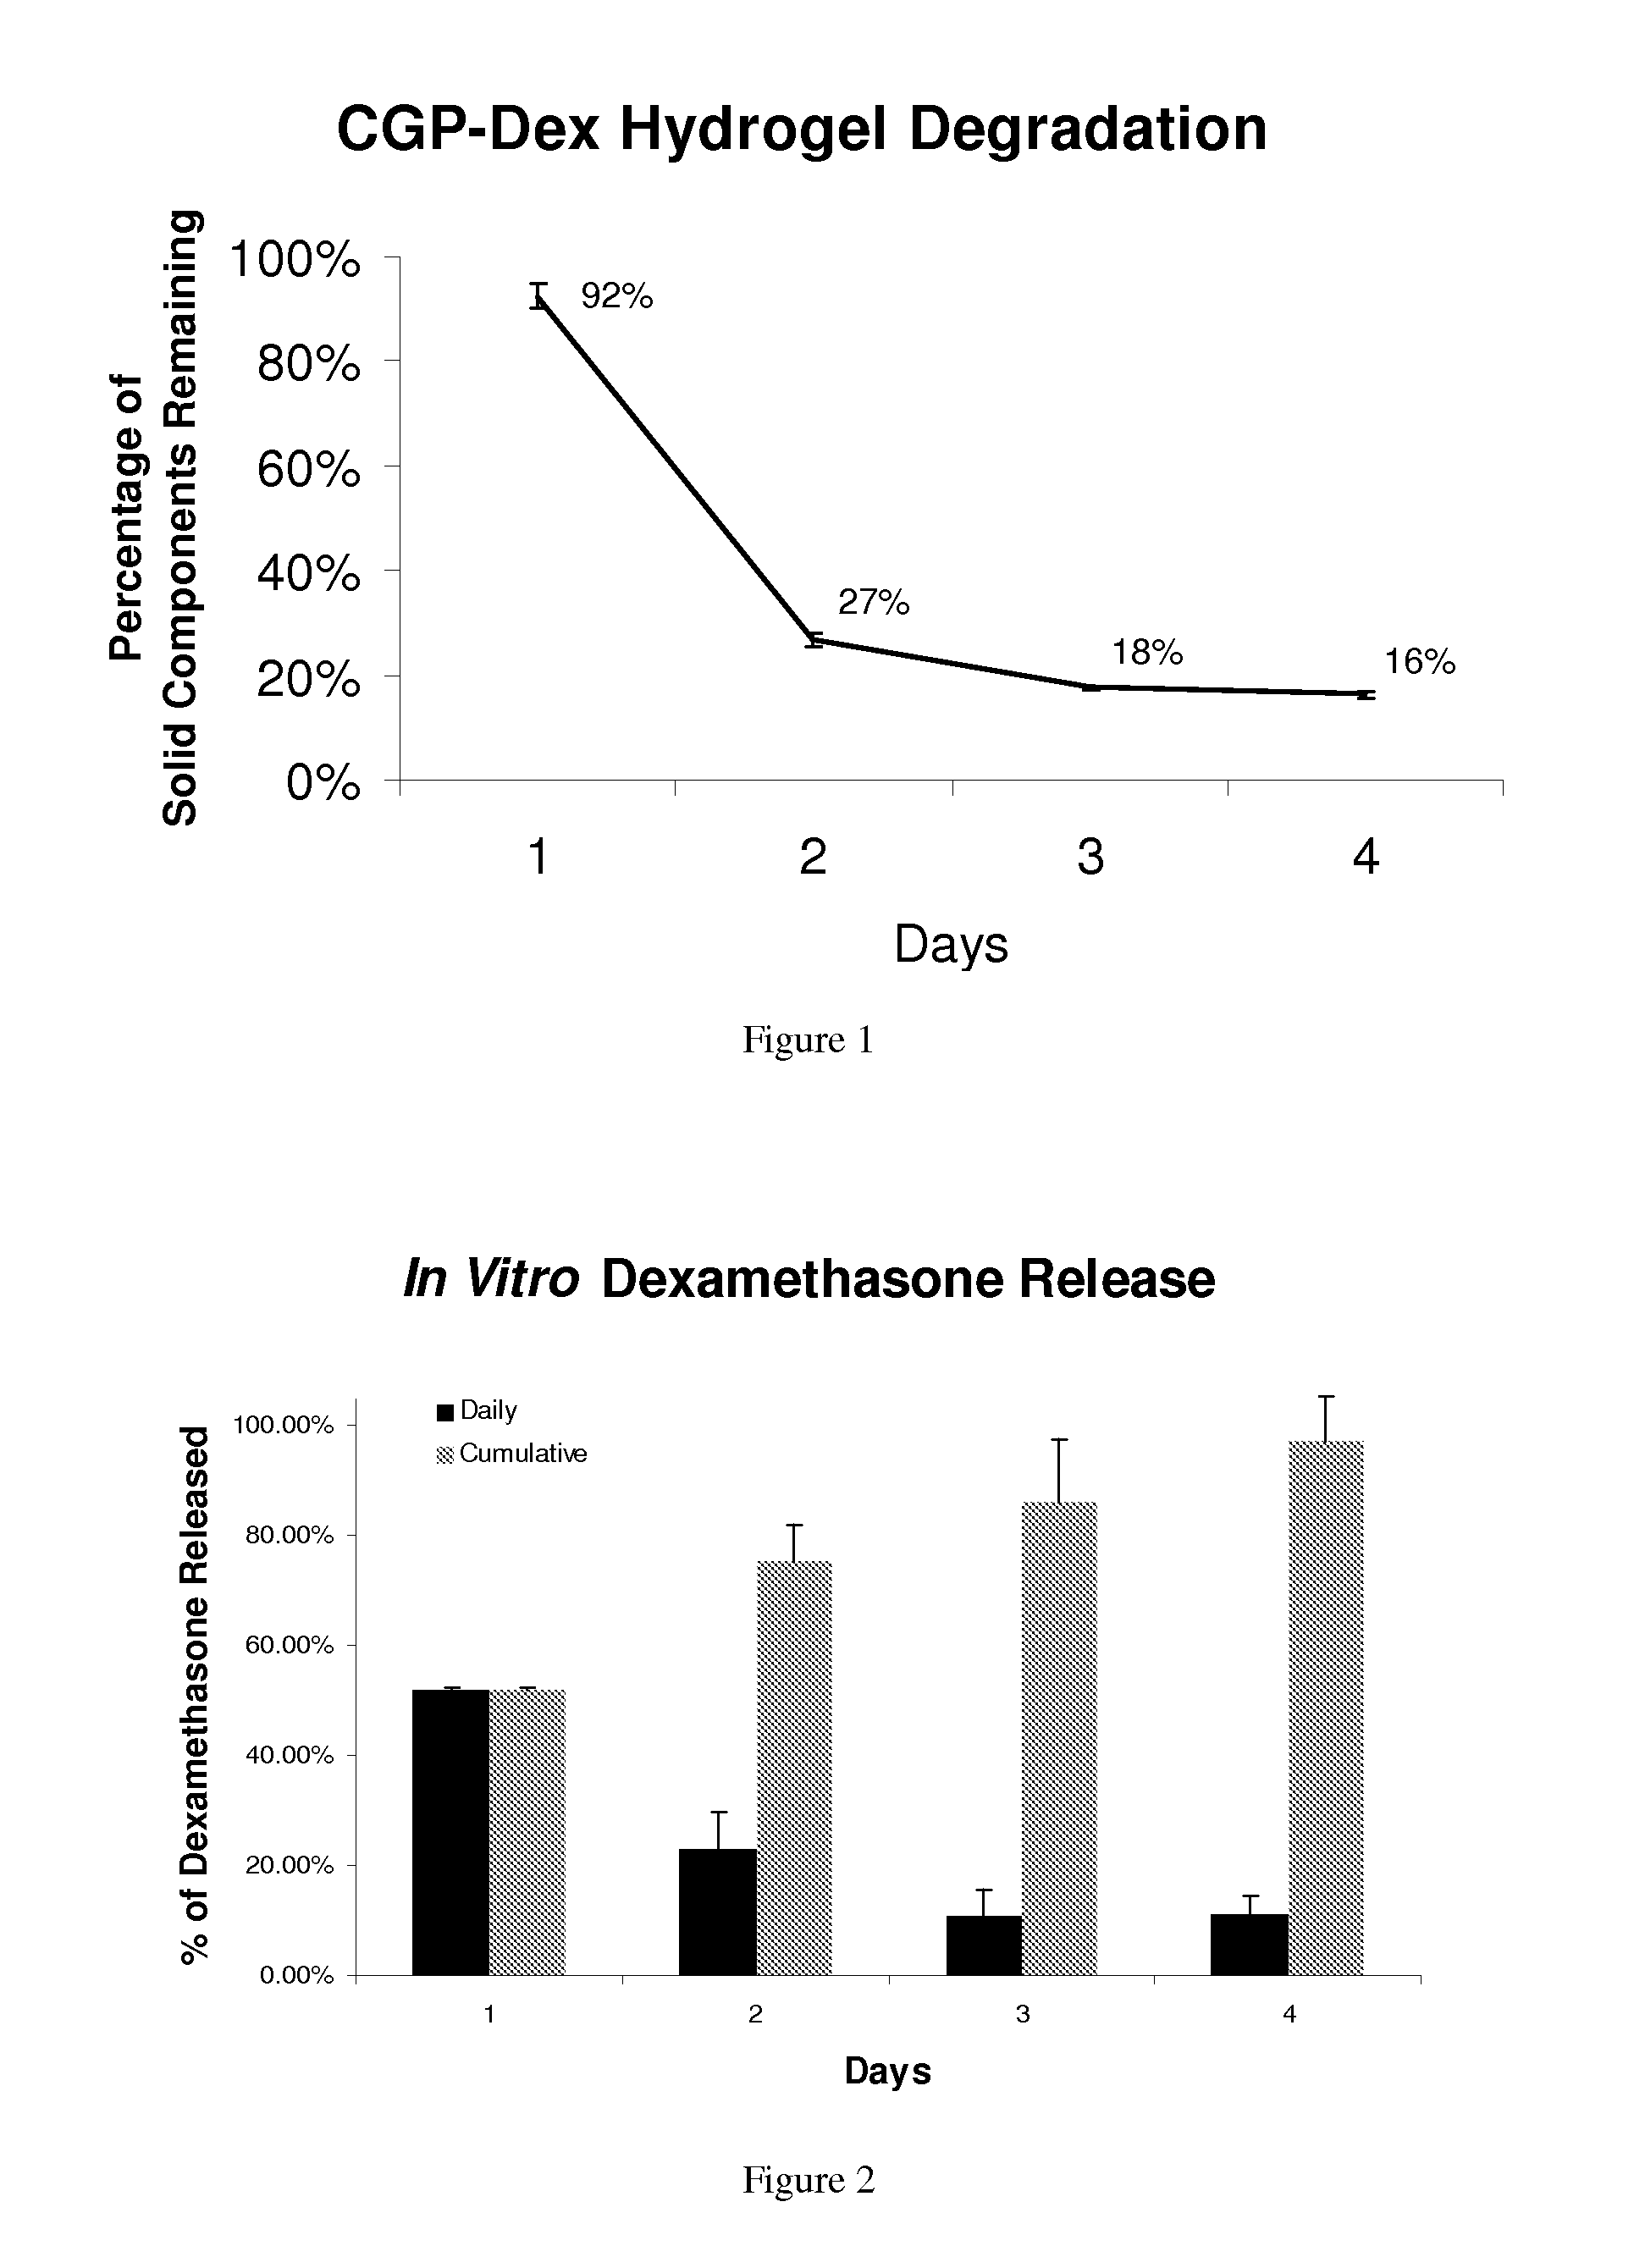 Regulated delivery systems for inner ear drug application and uses thereof